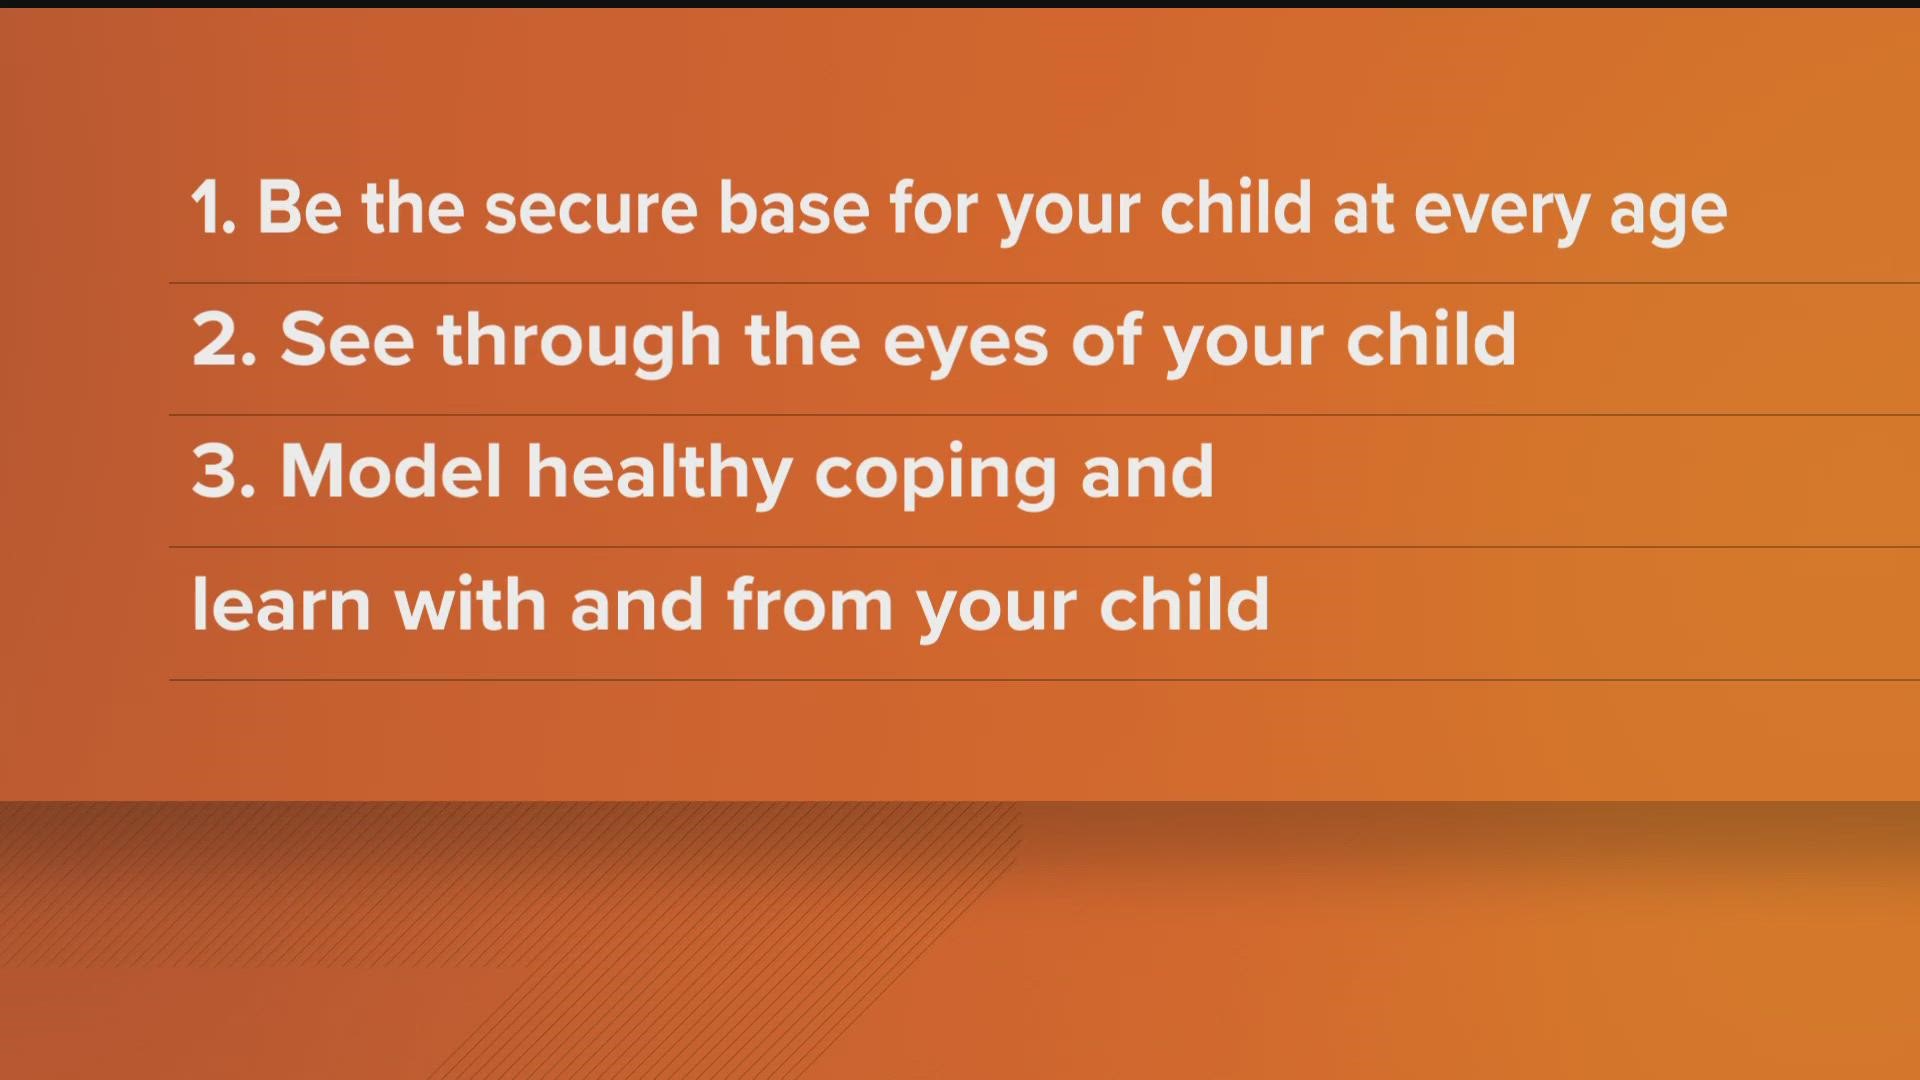 Dr. Marti Erickson joined KARE 11 Saturday with three things parents can do to teach their kids resilience.